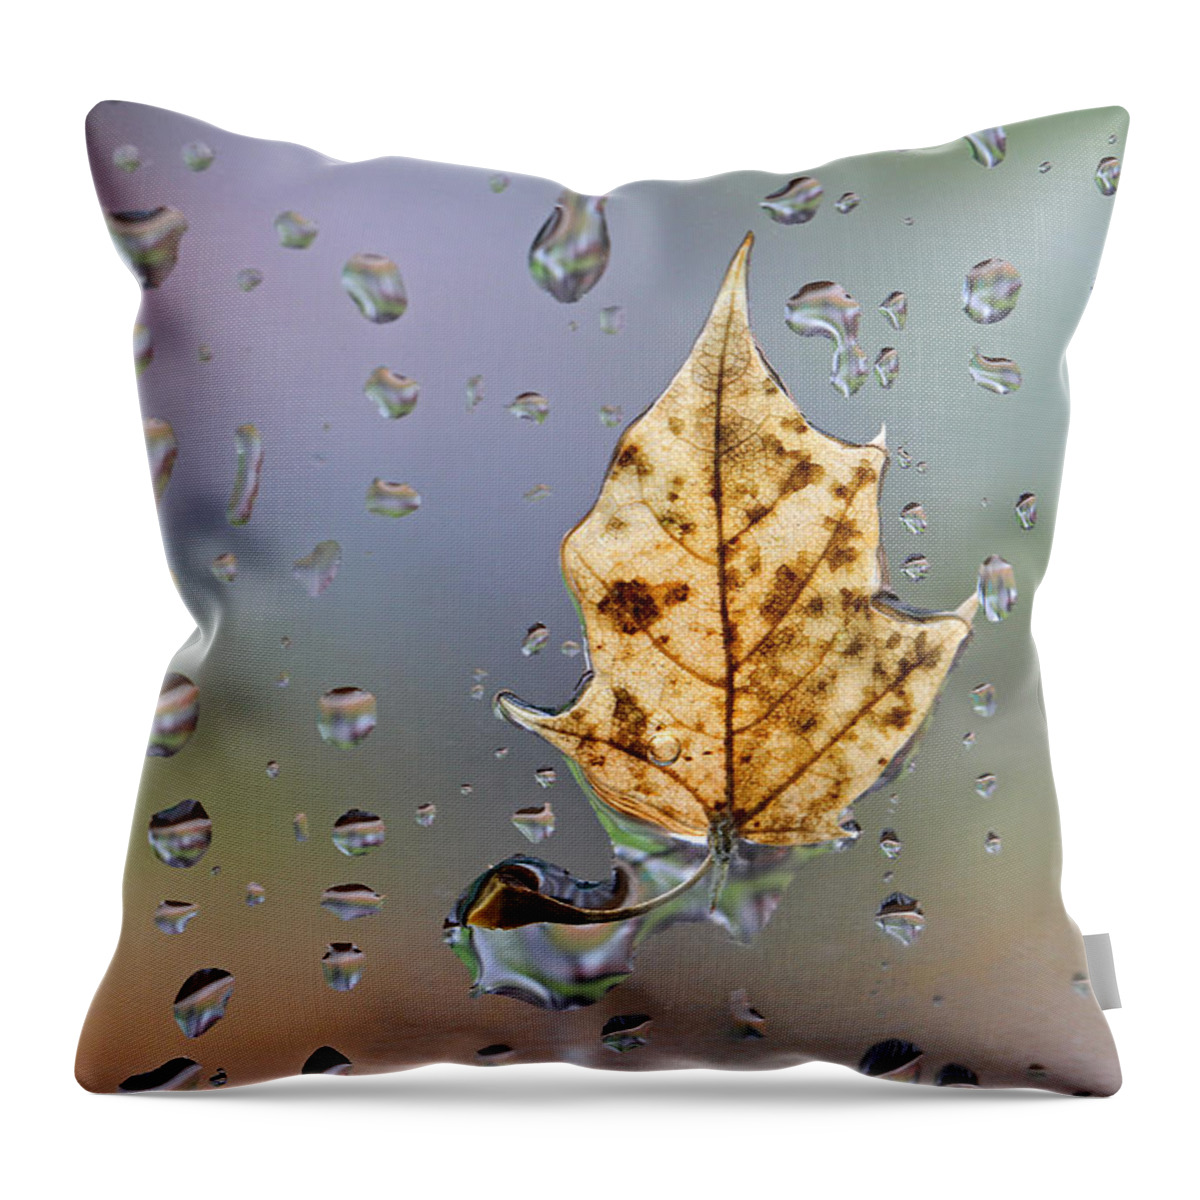 Neon Throw Pillow featuring the photograph Neon Leaf by Juergen Roth